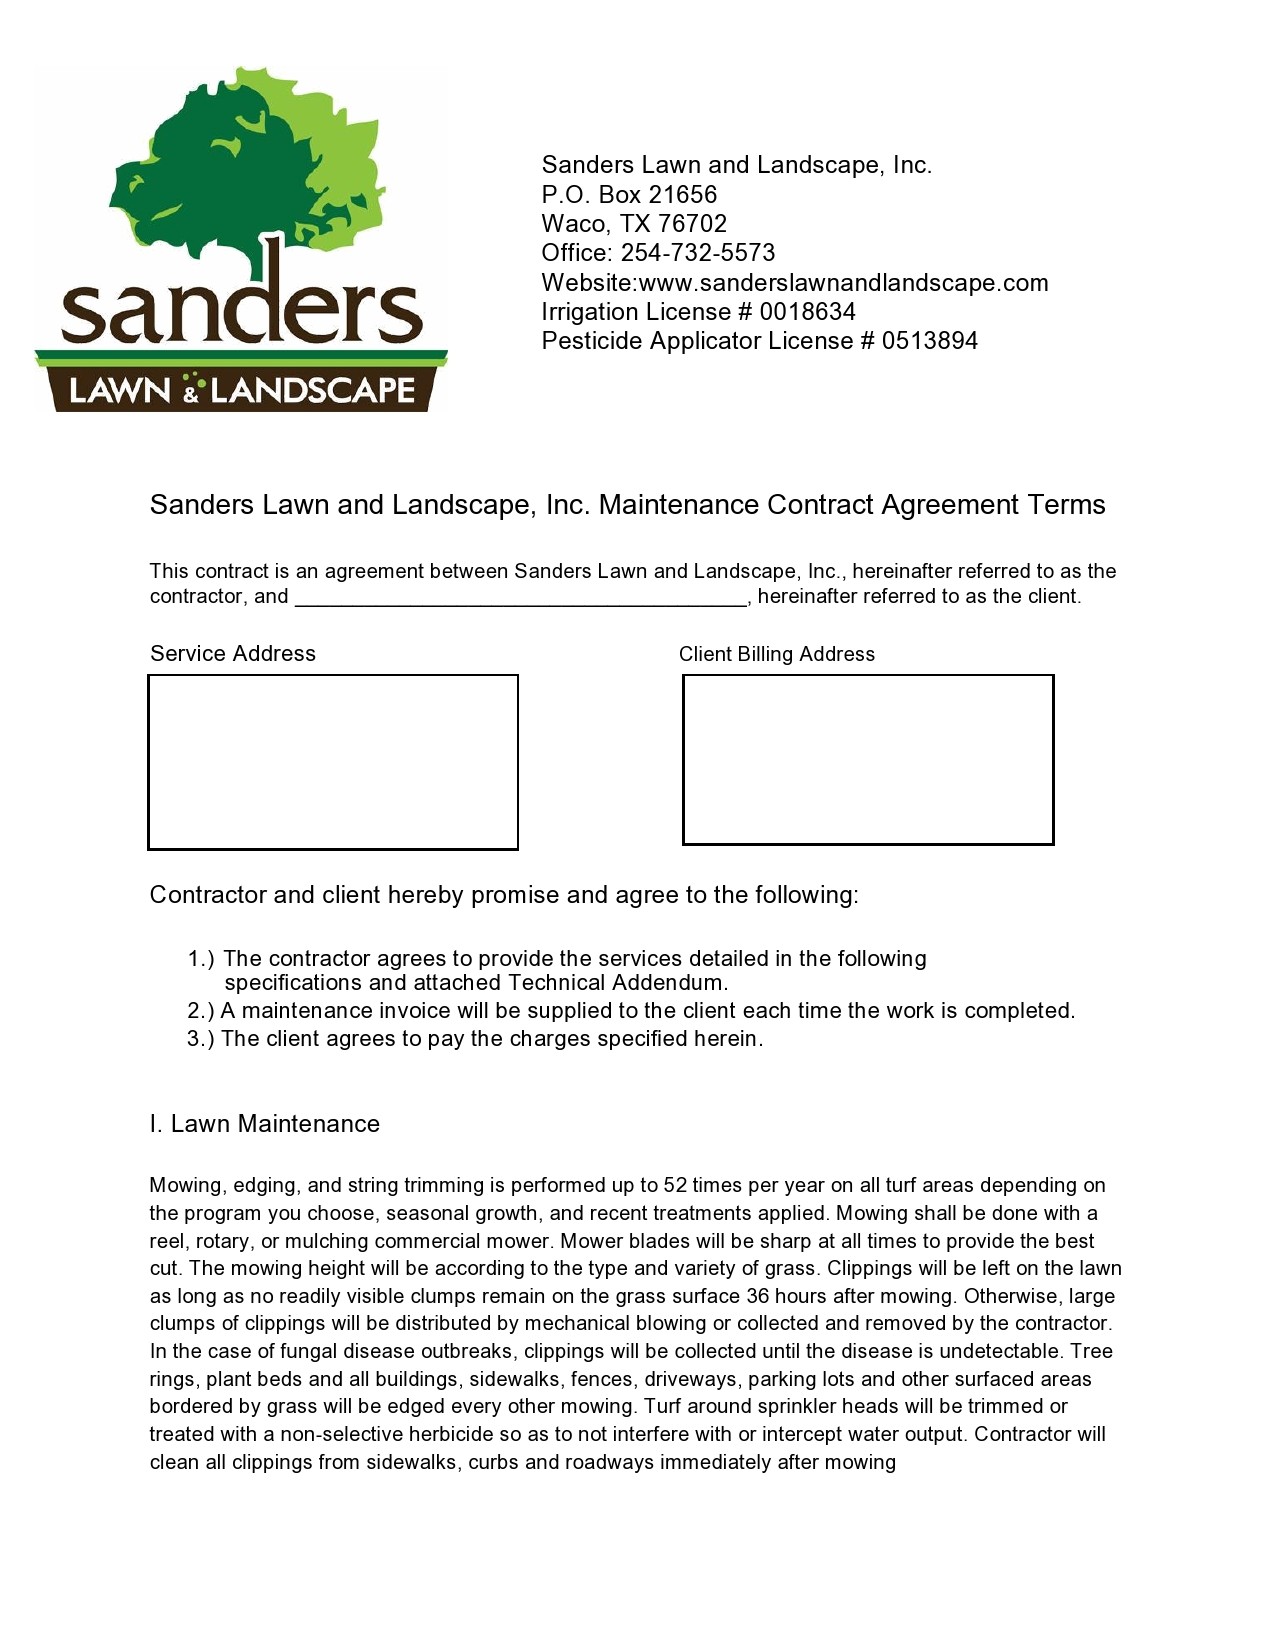 40 Professional Lawn Care Contract Templates FREE 